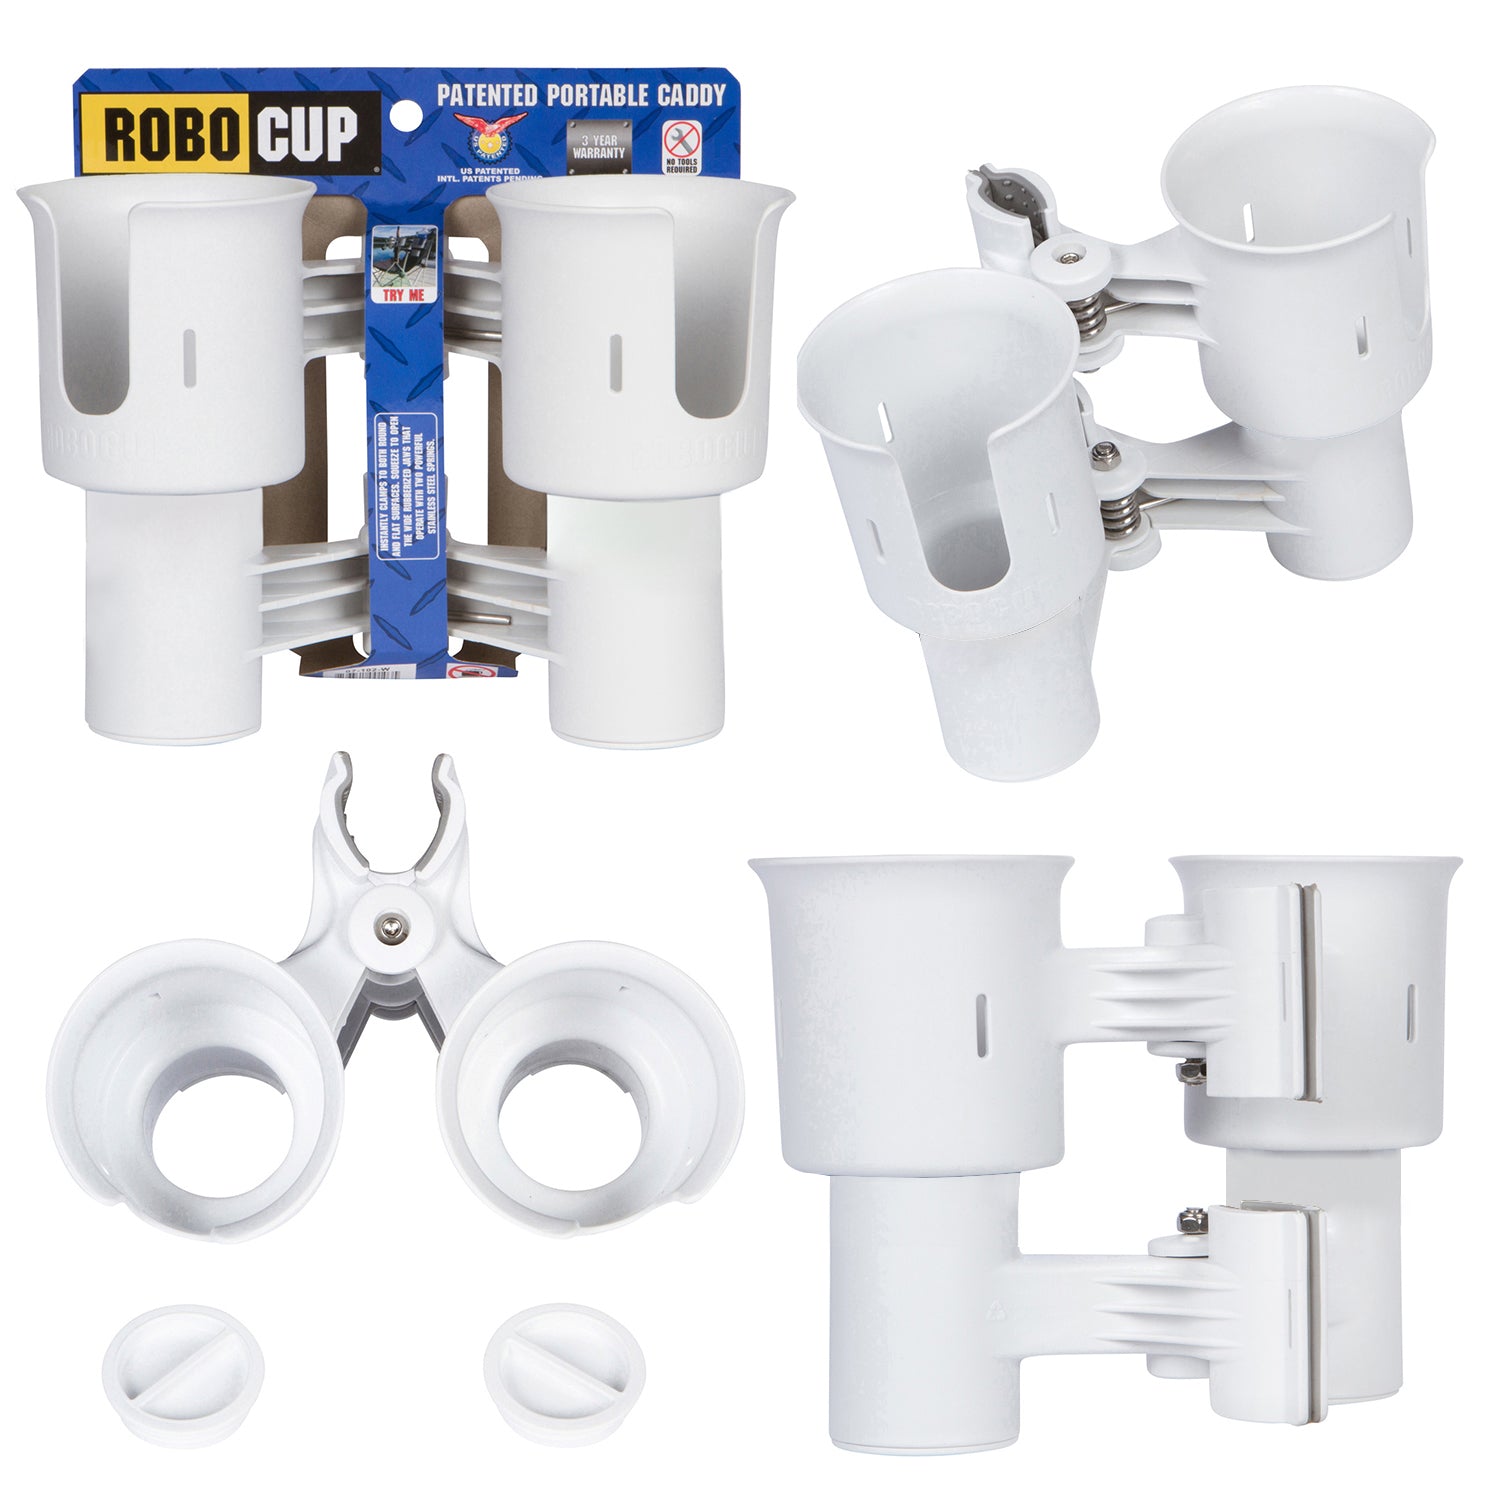 ROBOCUP Best Cup Holder for Drinks, Fishing Rod/Pole, Boat